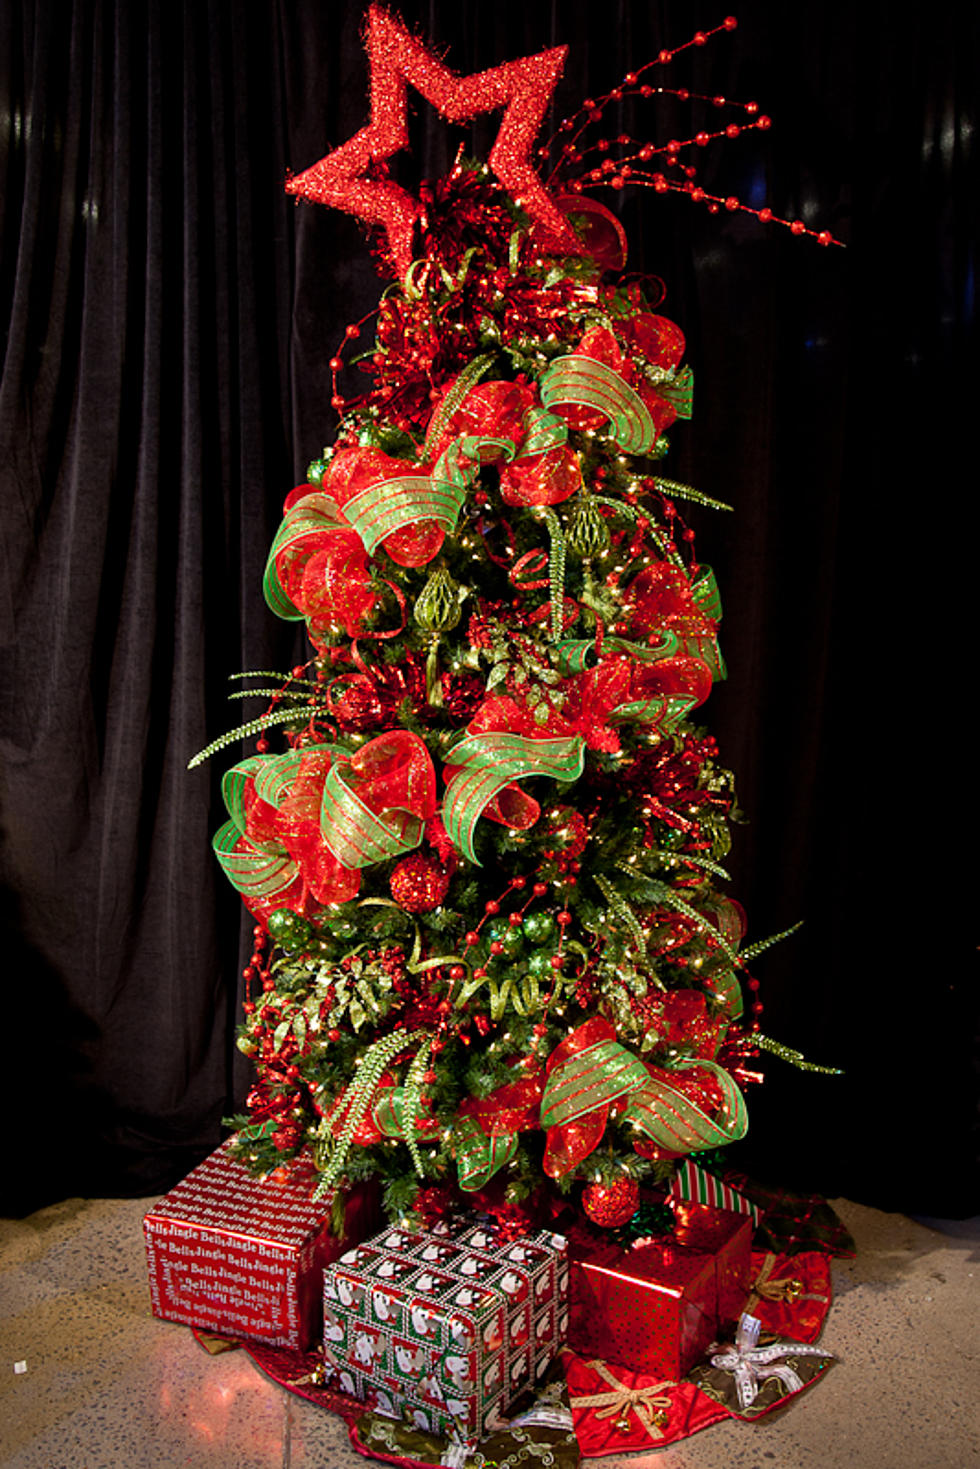 Christmas Wish Tree Up for Bid At Gaylord Opryland’s Hall of Trees